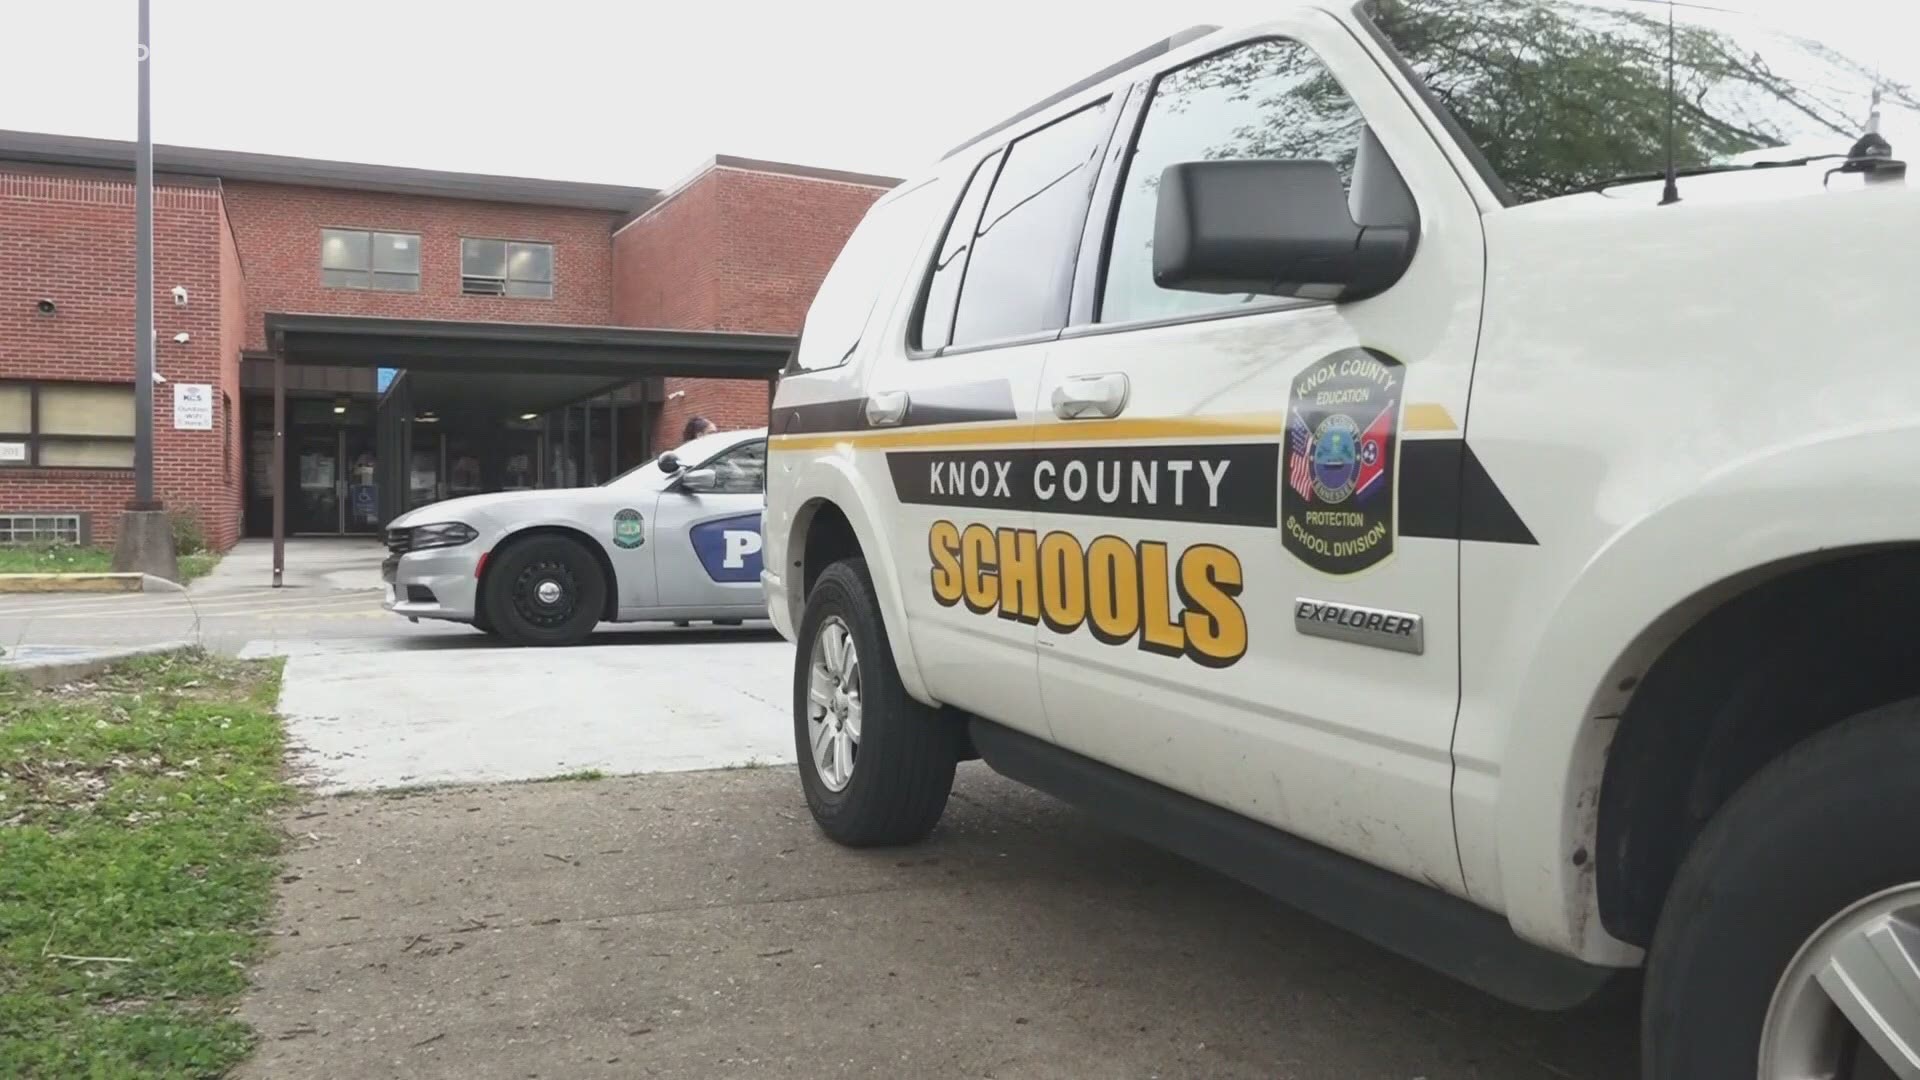 In a meeting Wednesday afternoon, Knox County Schools leaders started preparing for a new security agreement with police.